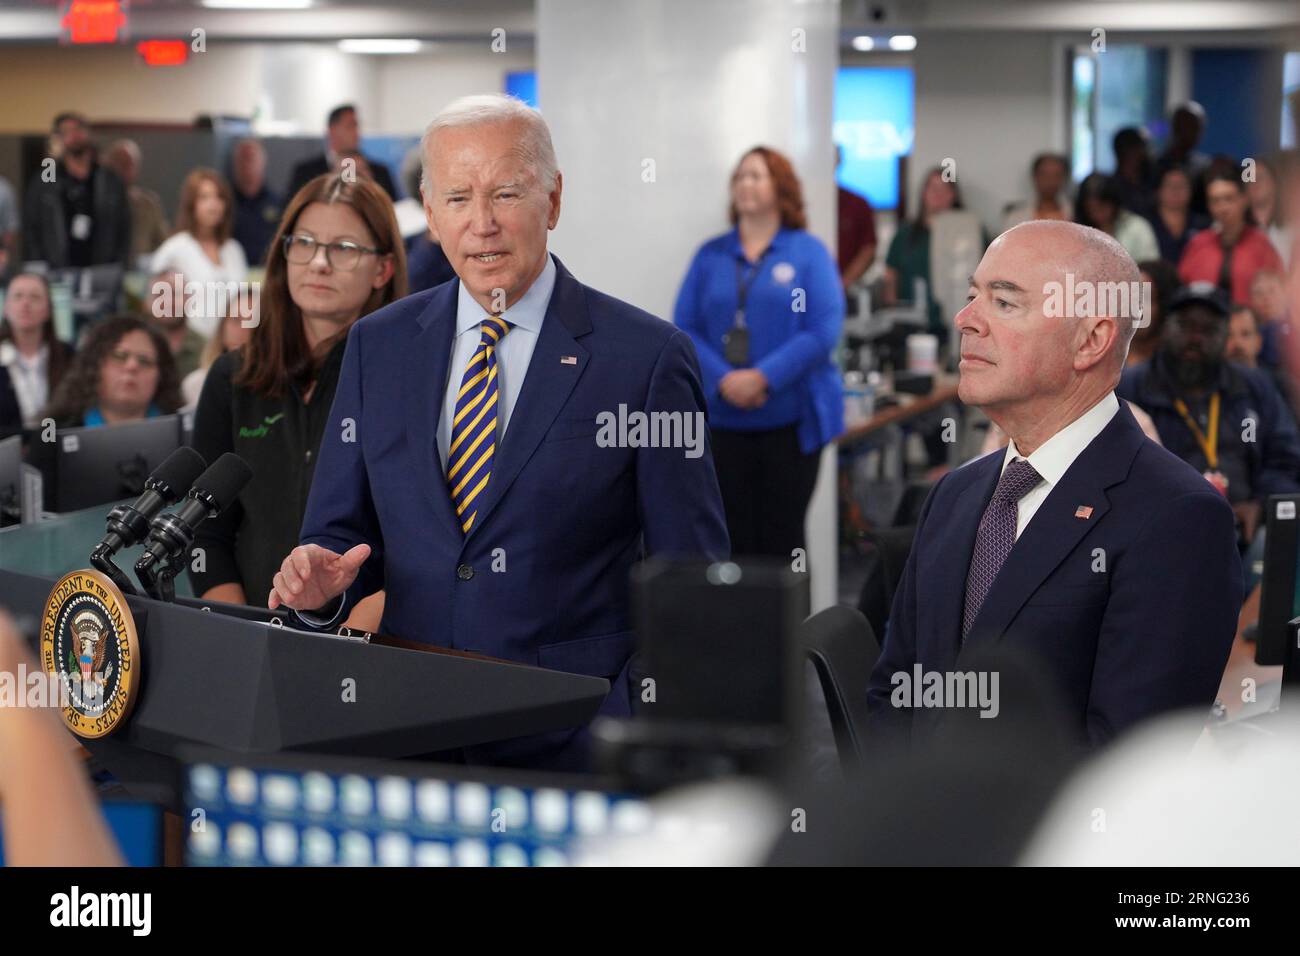 Washington, United States. 31st Aug, 2023. U.S. President Joe Biden, center, joined by Homeland Security Secretary Alejandro Mayorkas, right, delivers remarks during a visit to the Federal Emergency Management Agency Headquarters to thank staff for their response to the wildfires in Maui and Hurricane Idalia, August 31, 2023 in Washington, DC Credit: Graham Haynes/FEMA/Alamy Live News Stock Photo